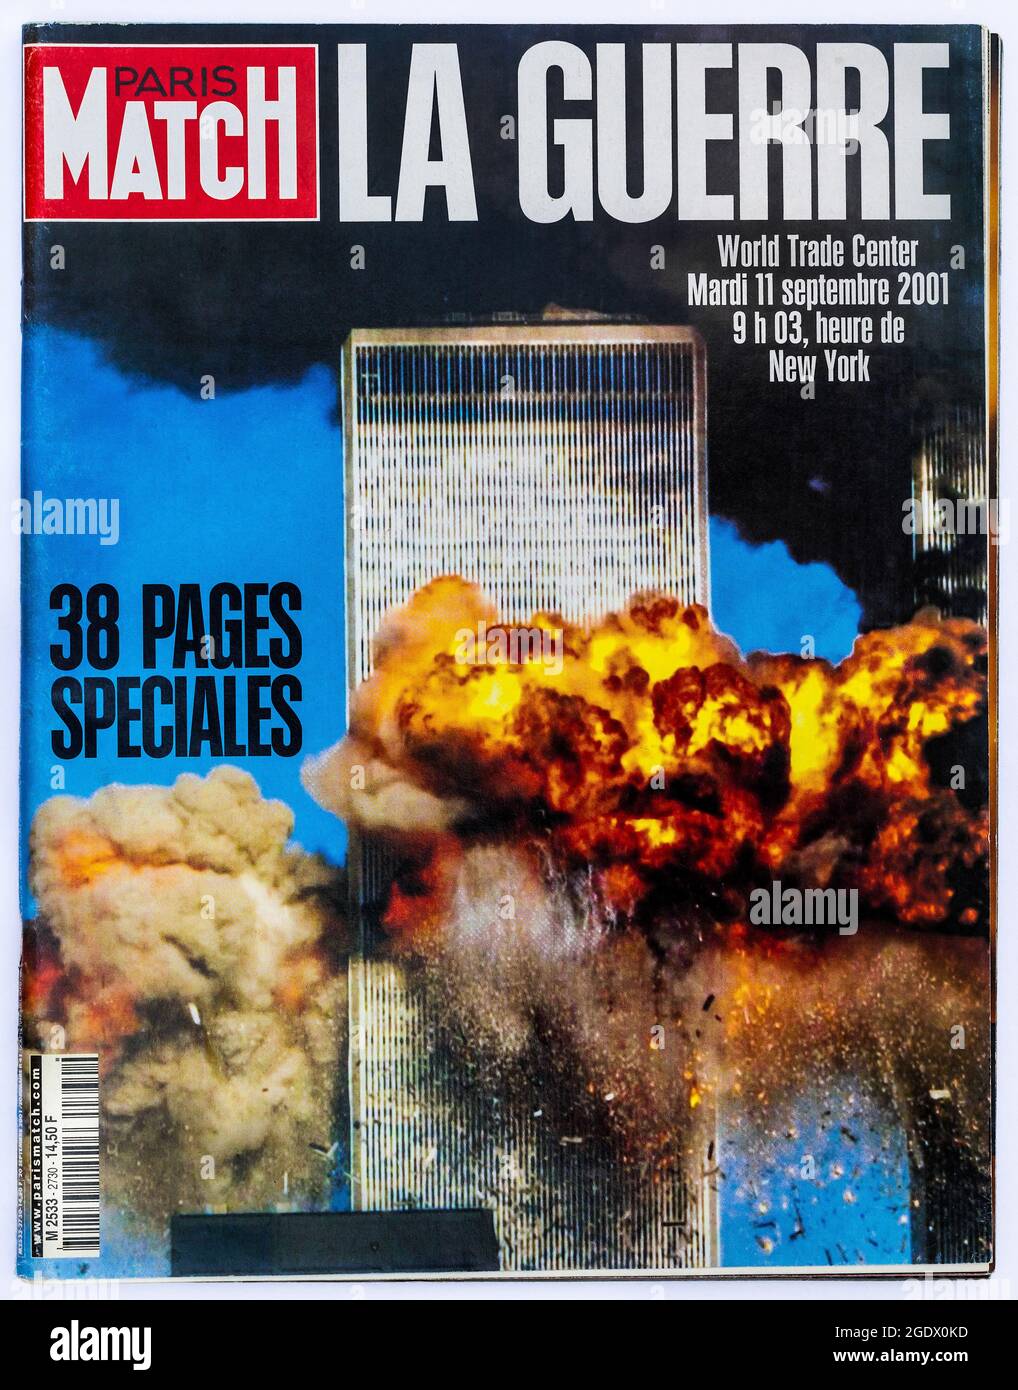 French 'Paris Match' magazine cover reporting the 9/11 terror attack on the World Trade Center, New York, USA on September 11, 2001. Stock Photo